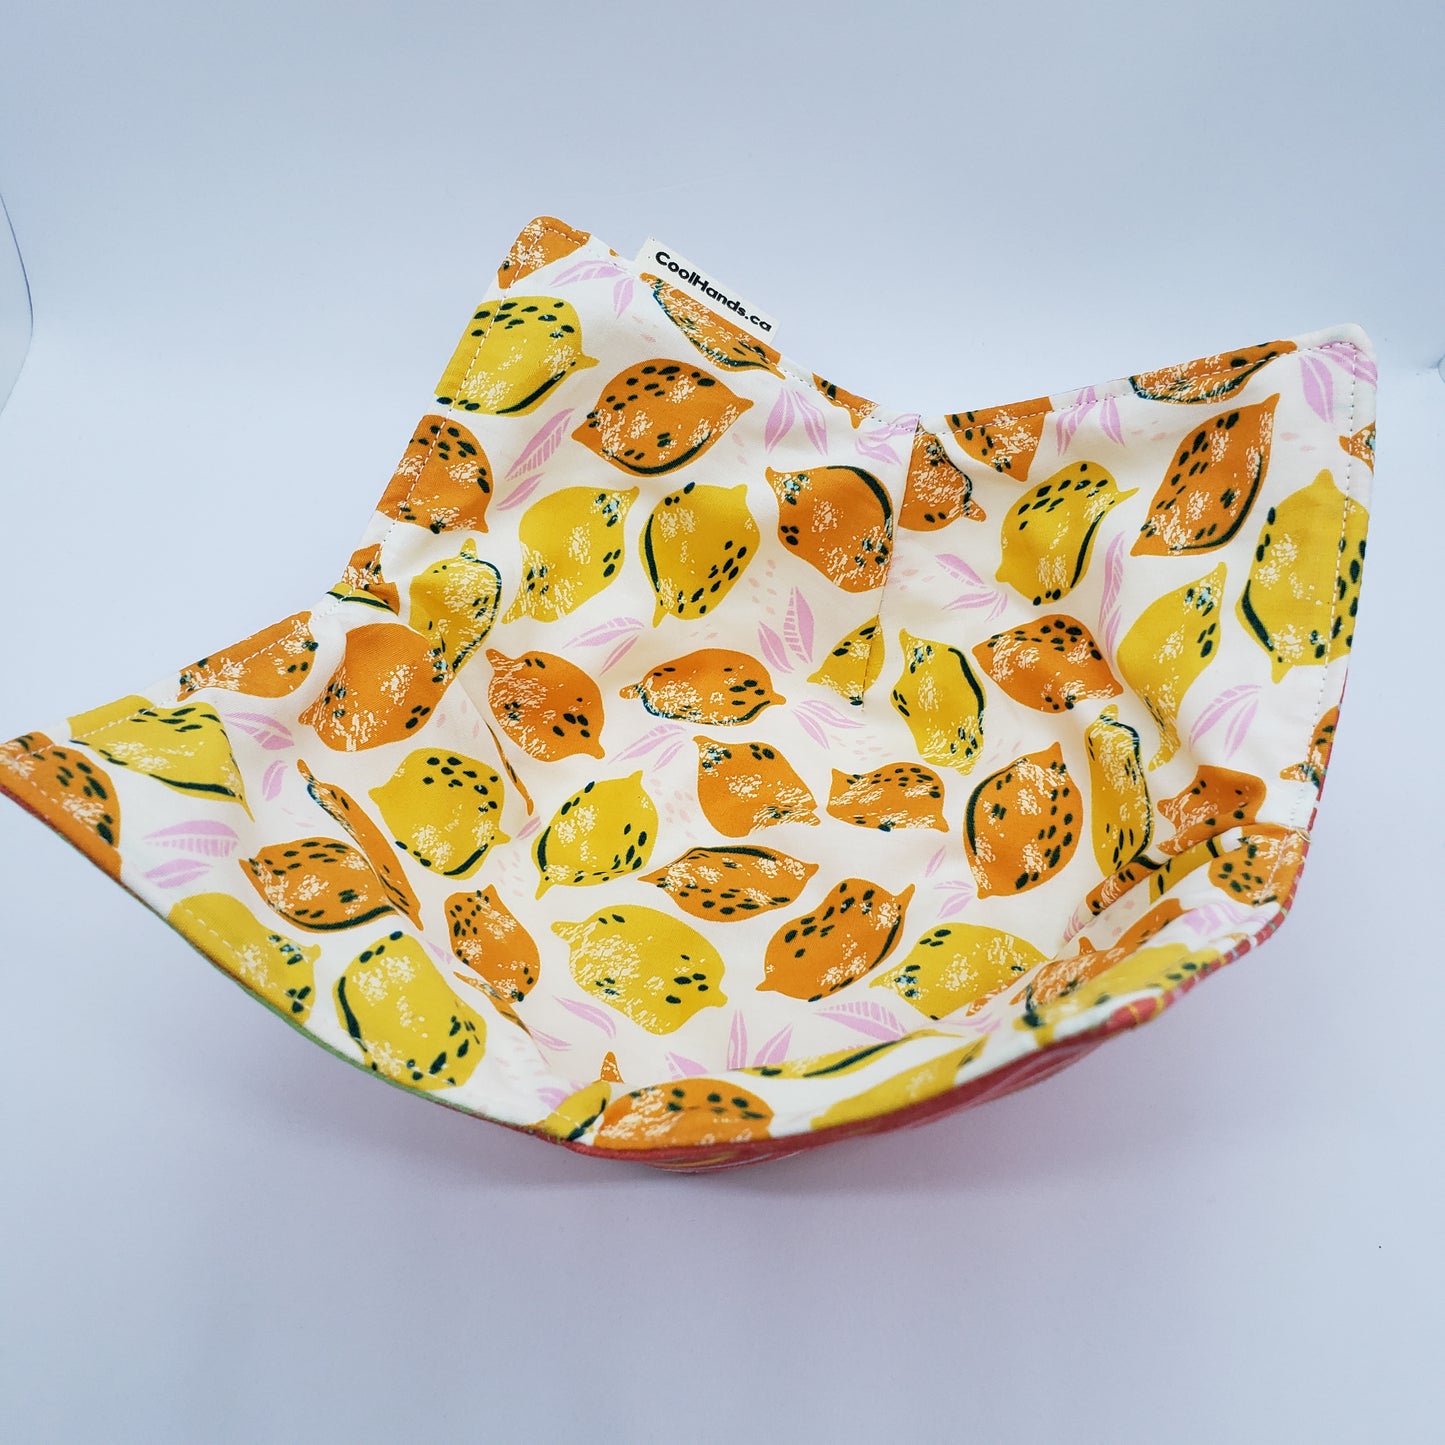 100% Cotton Microwavable Bowl Cozy - When Life Gives You Lemons